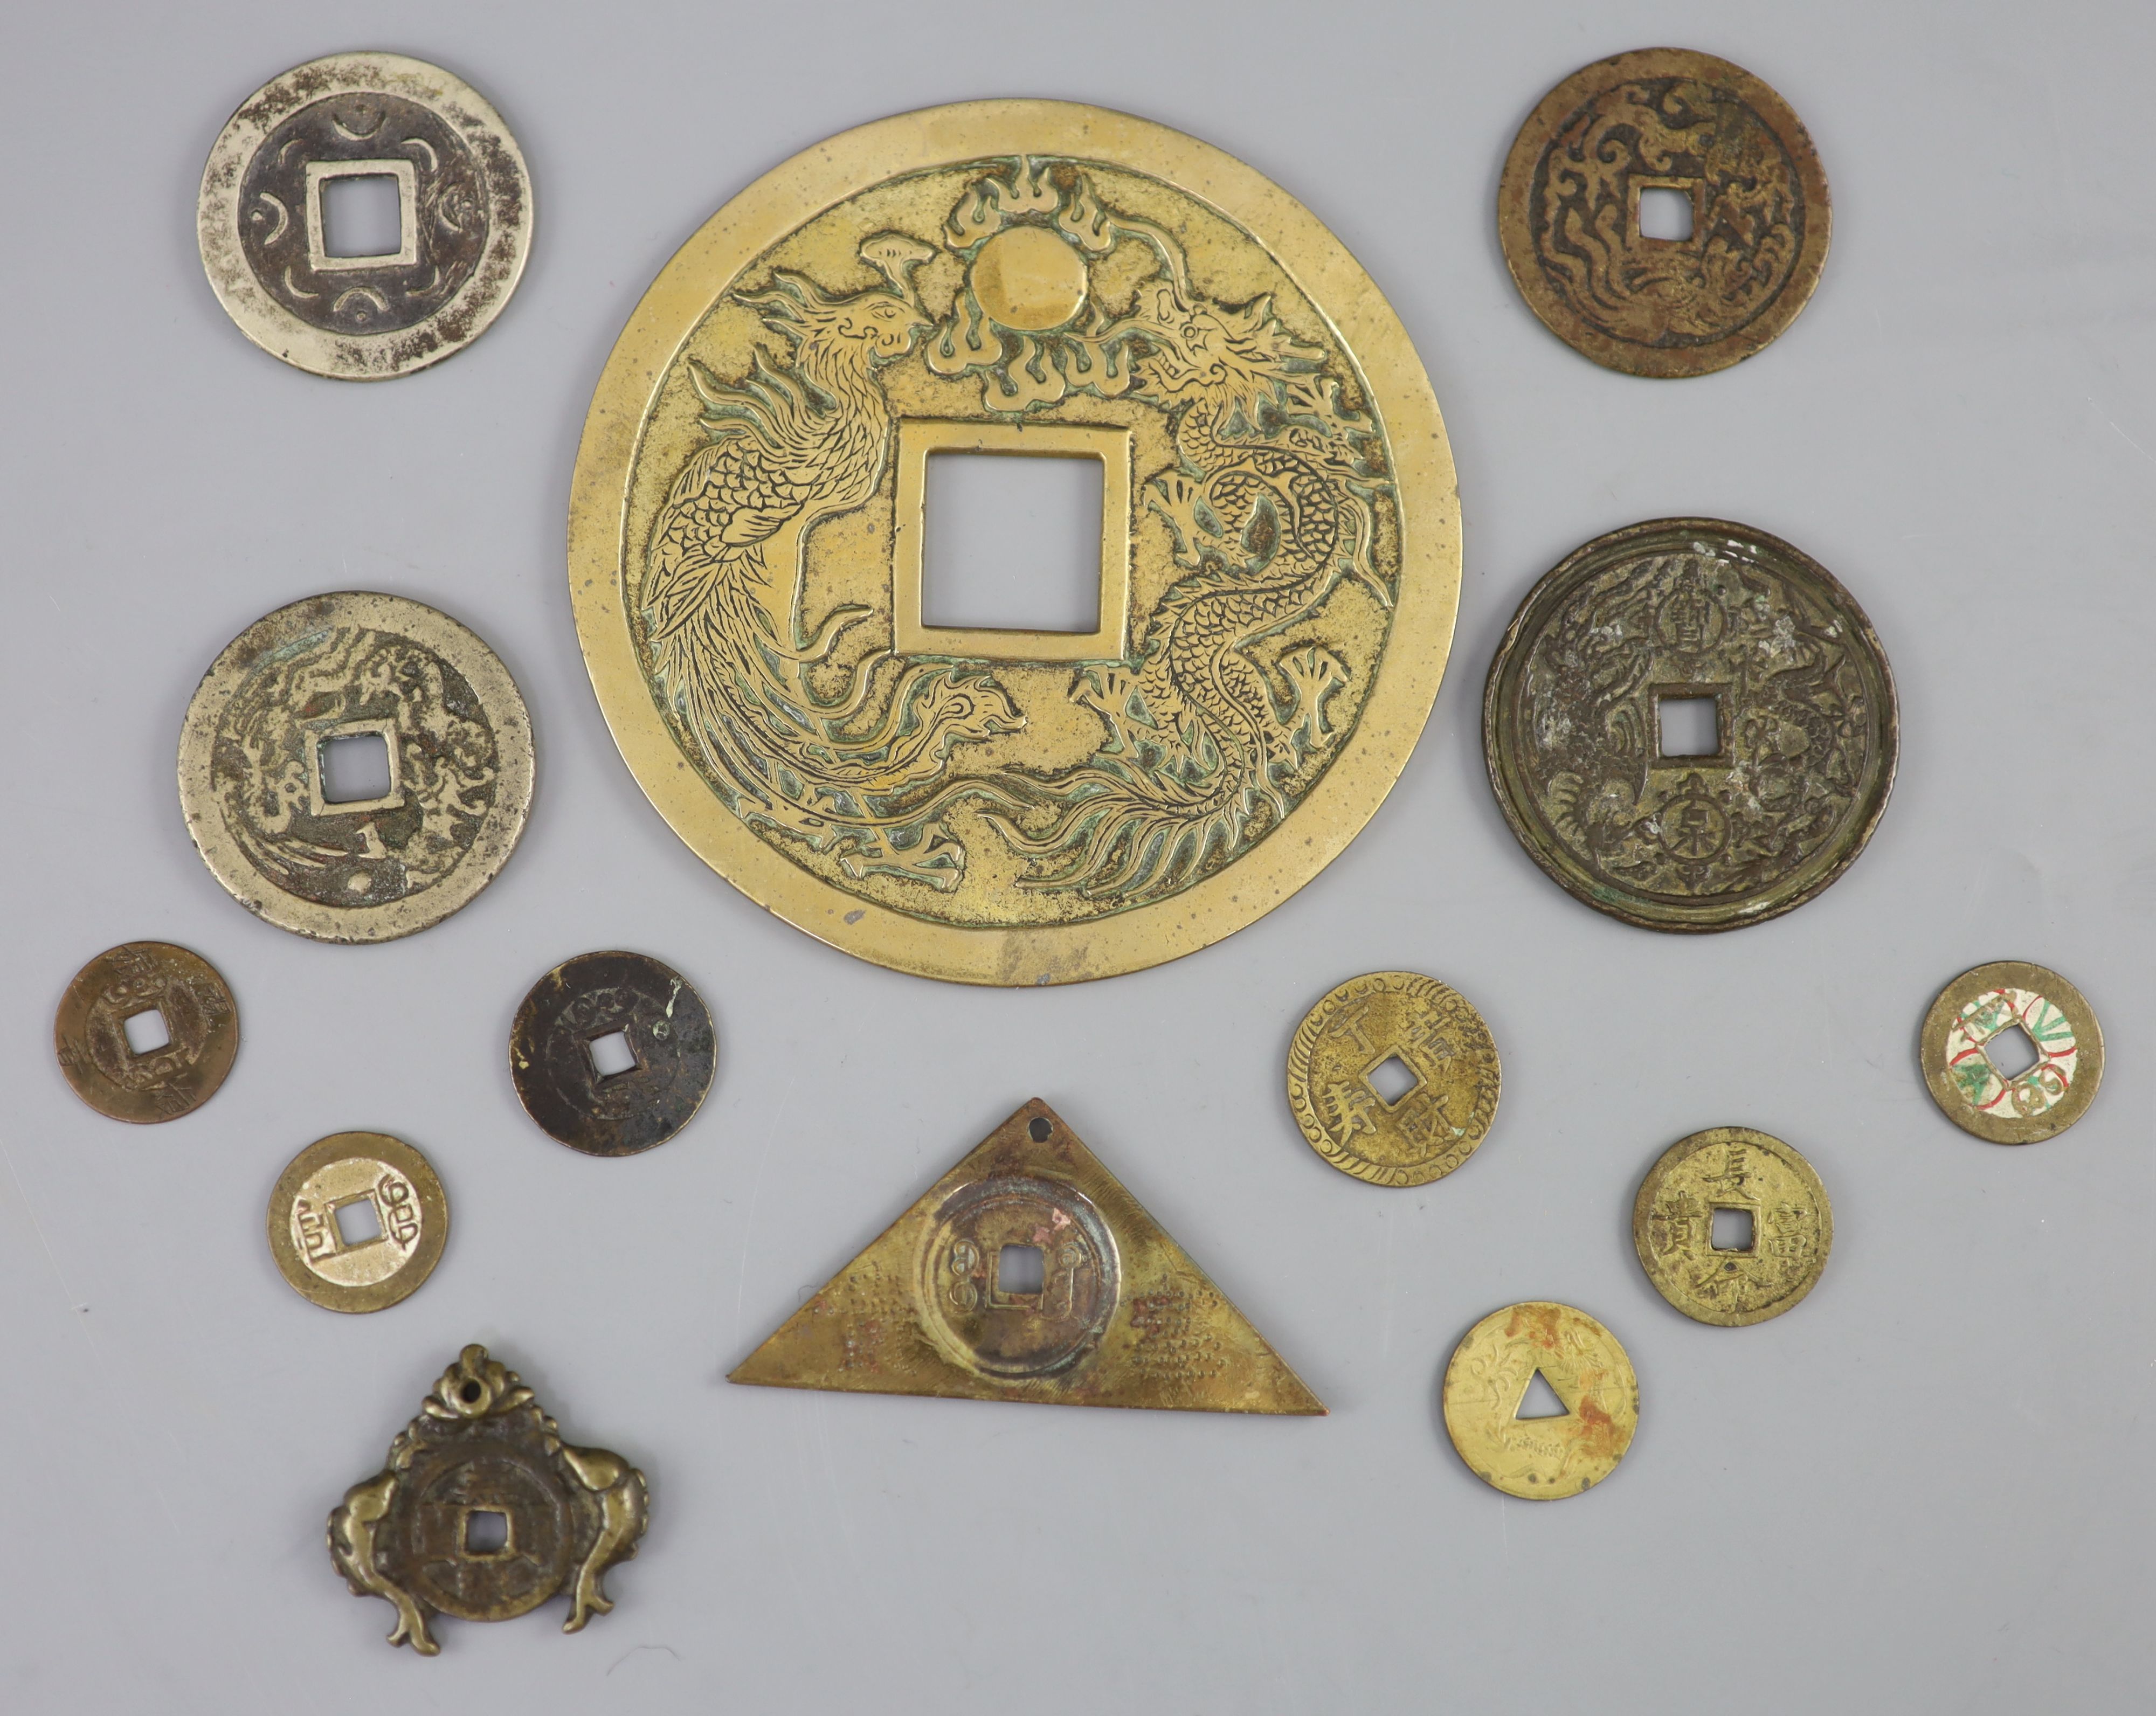 China, a group of 14 bronze and brass coin charms or amulets, Qing to Republic period, F to VF to - Bild 2 aus 2